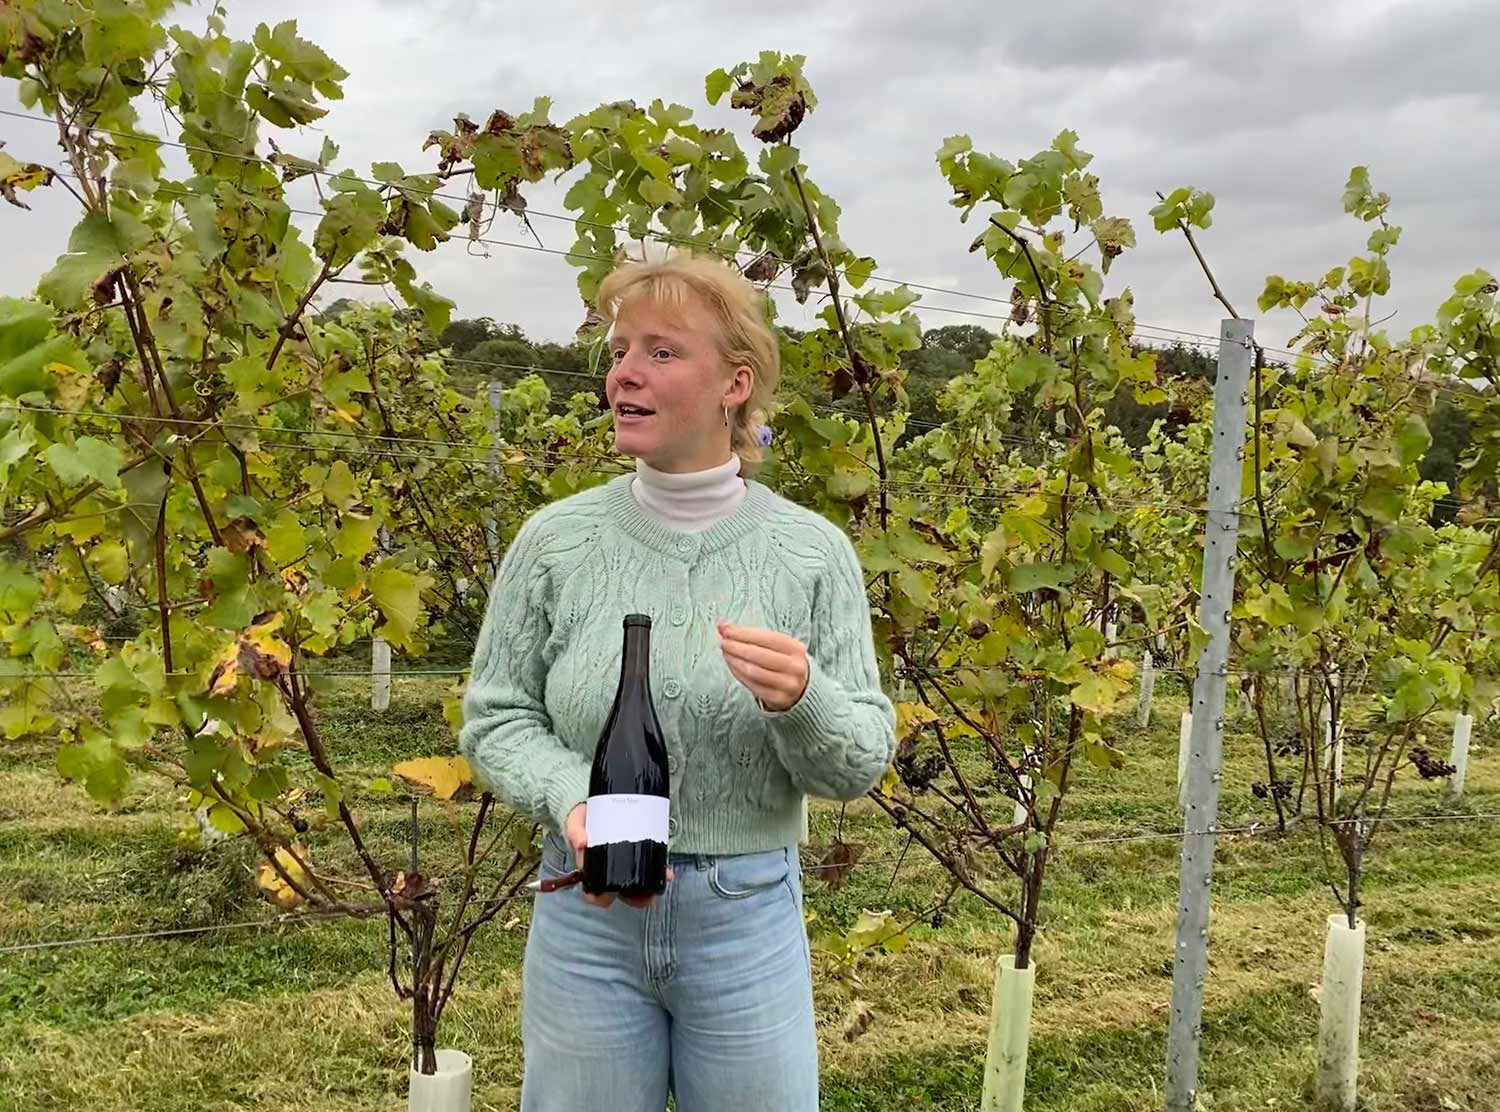 Tillingham The wonderful Lucy showing us around the vineyards